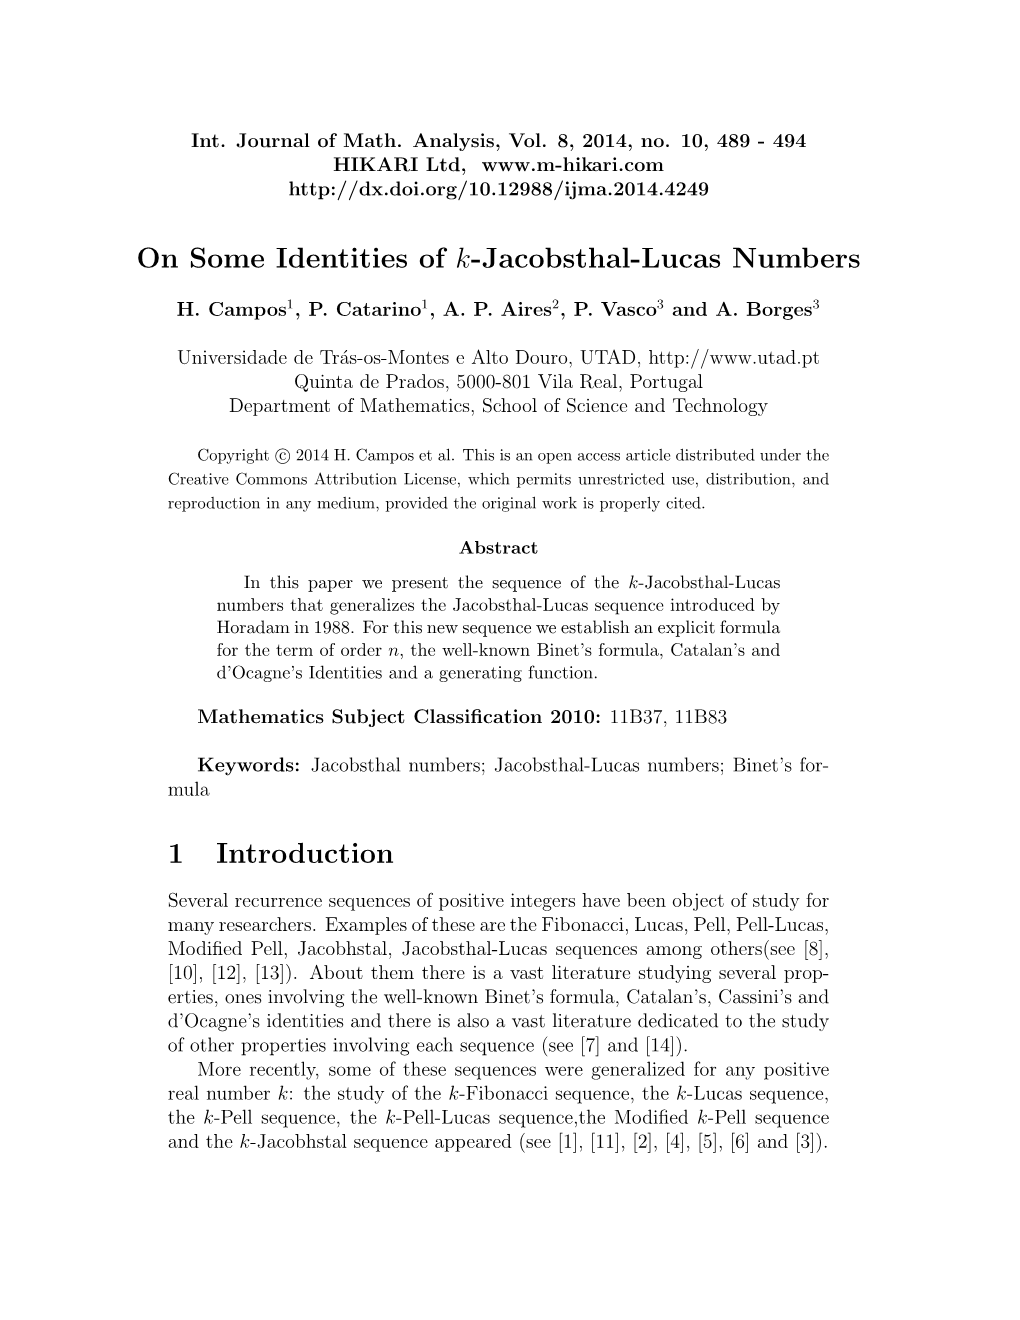 On Some Identities of K-Jacobsthal-Lucas Numbers 1